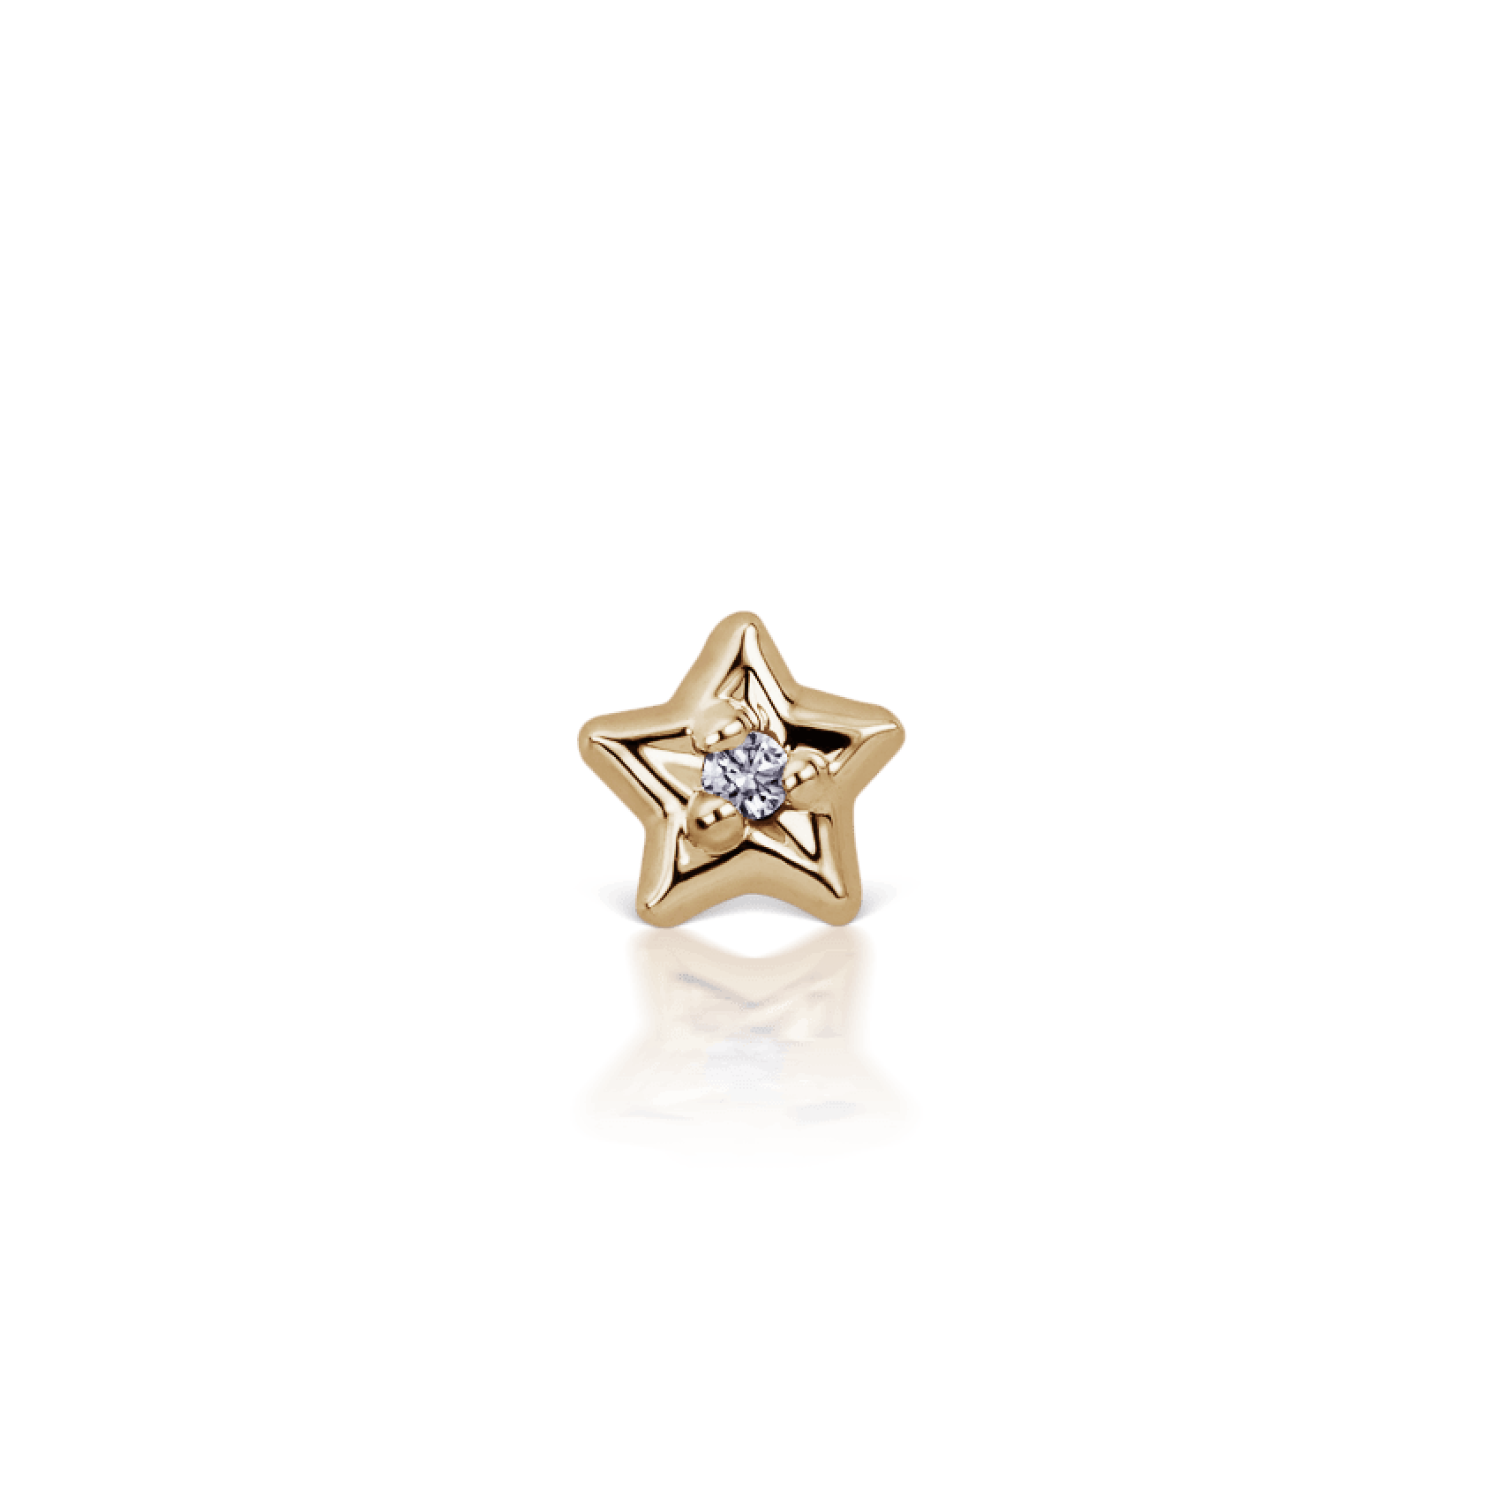 Small Star Threaded Nose Stud And Earrings 24kdiamond